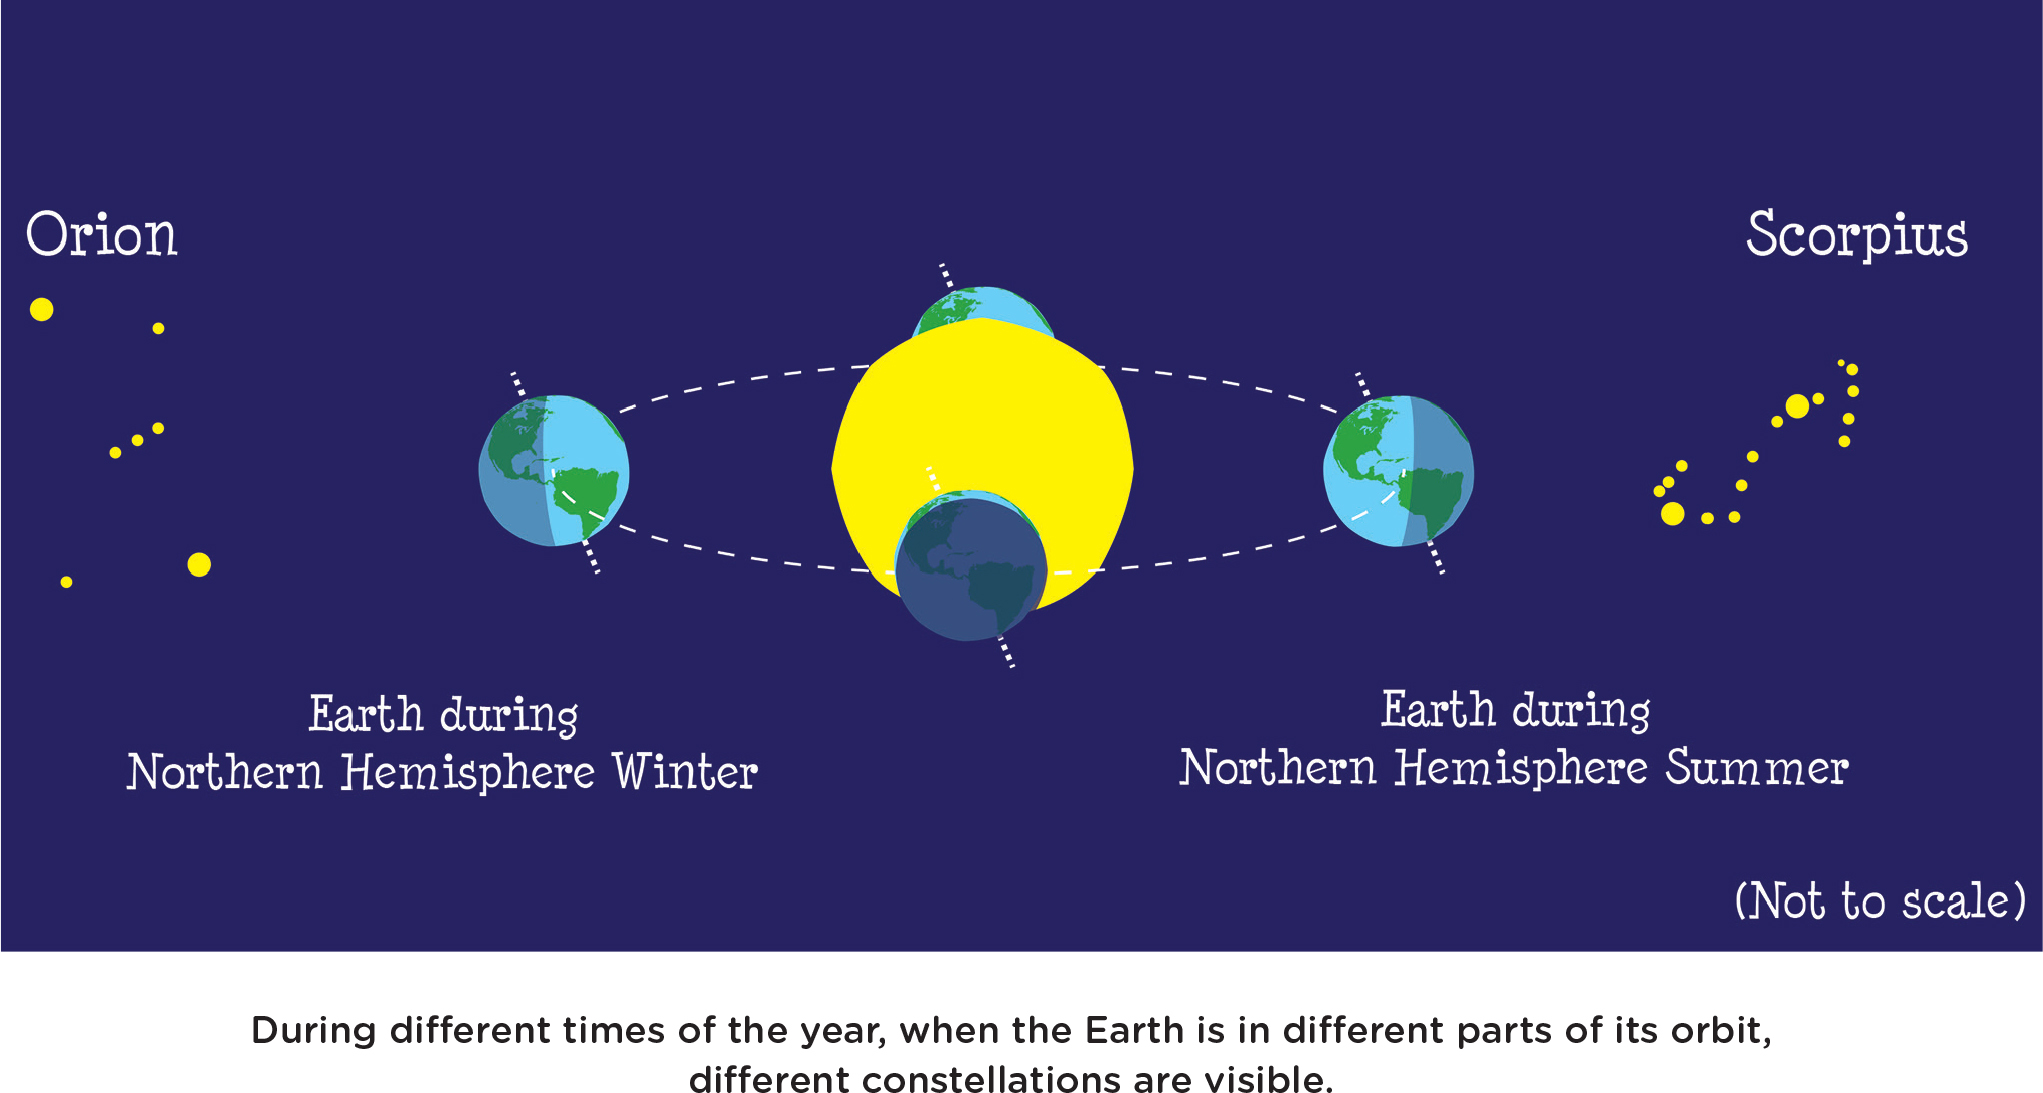 During different times of the year, when the Earth is in different parts of its orbit, different constellations are visible.